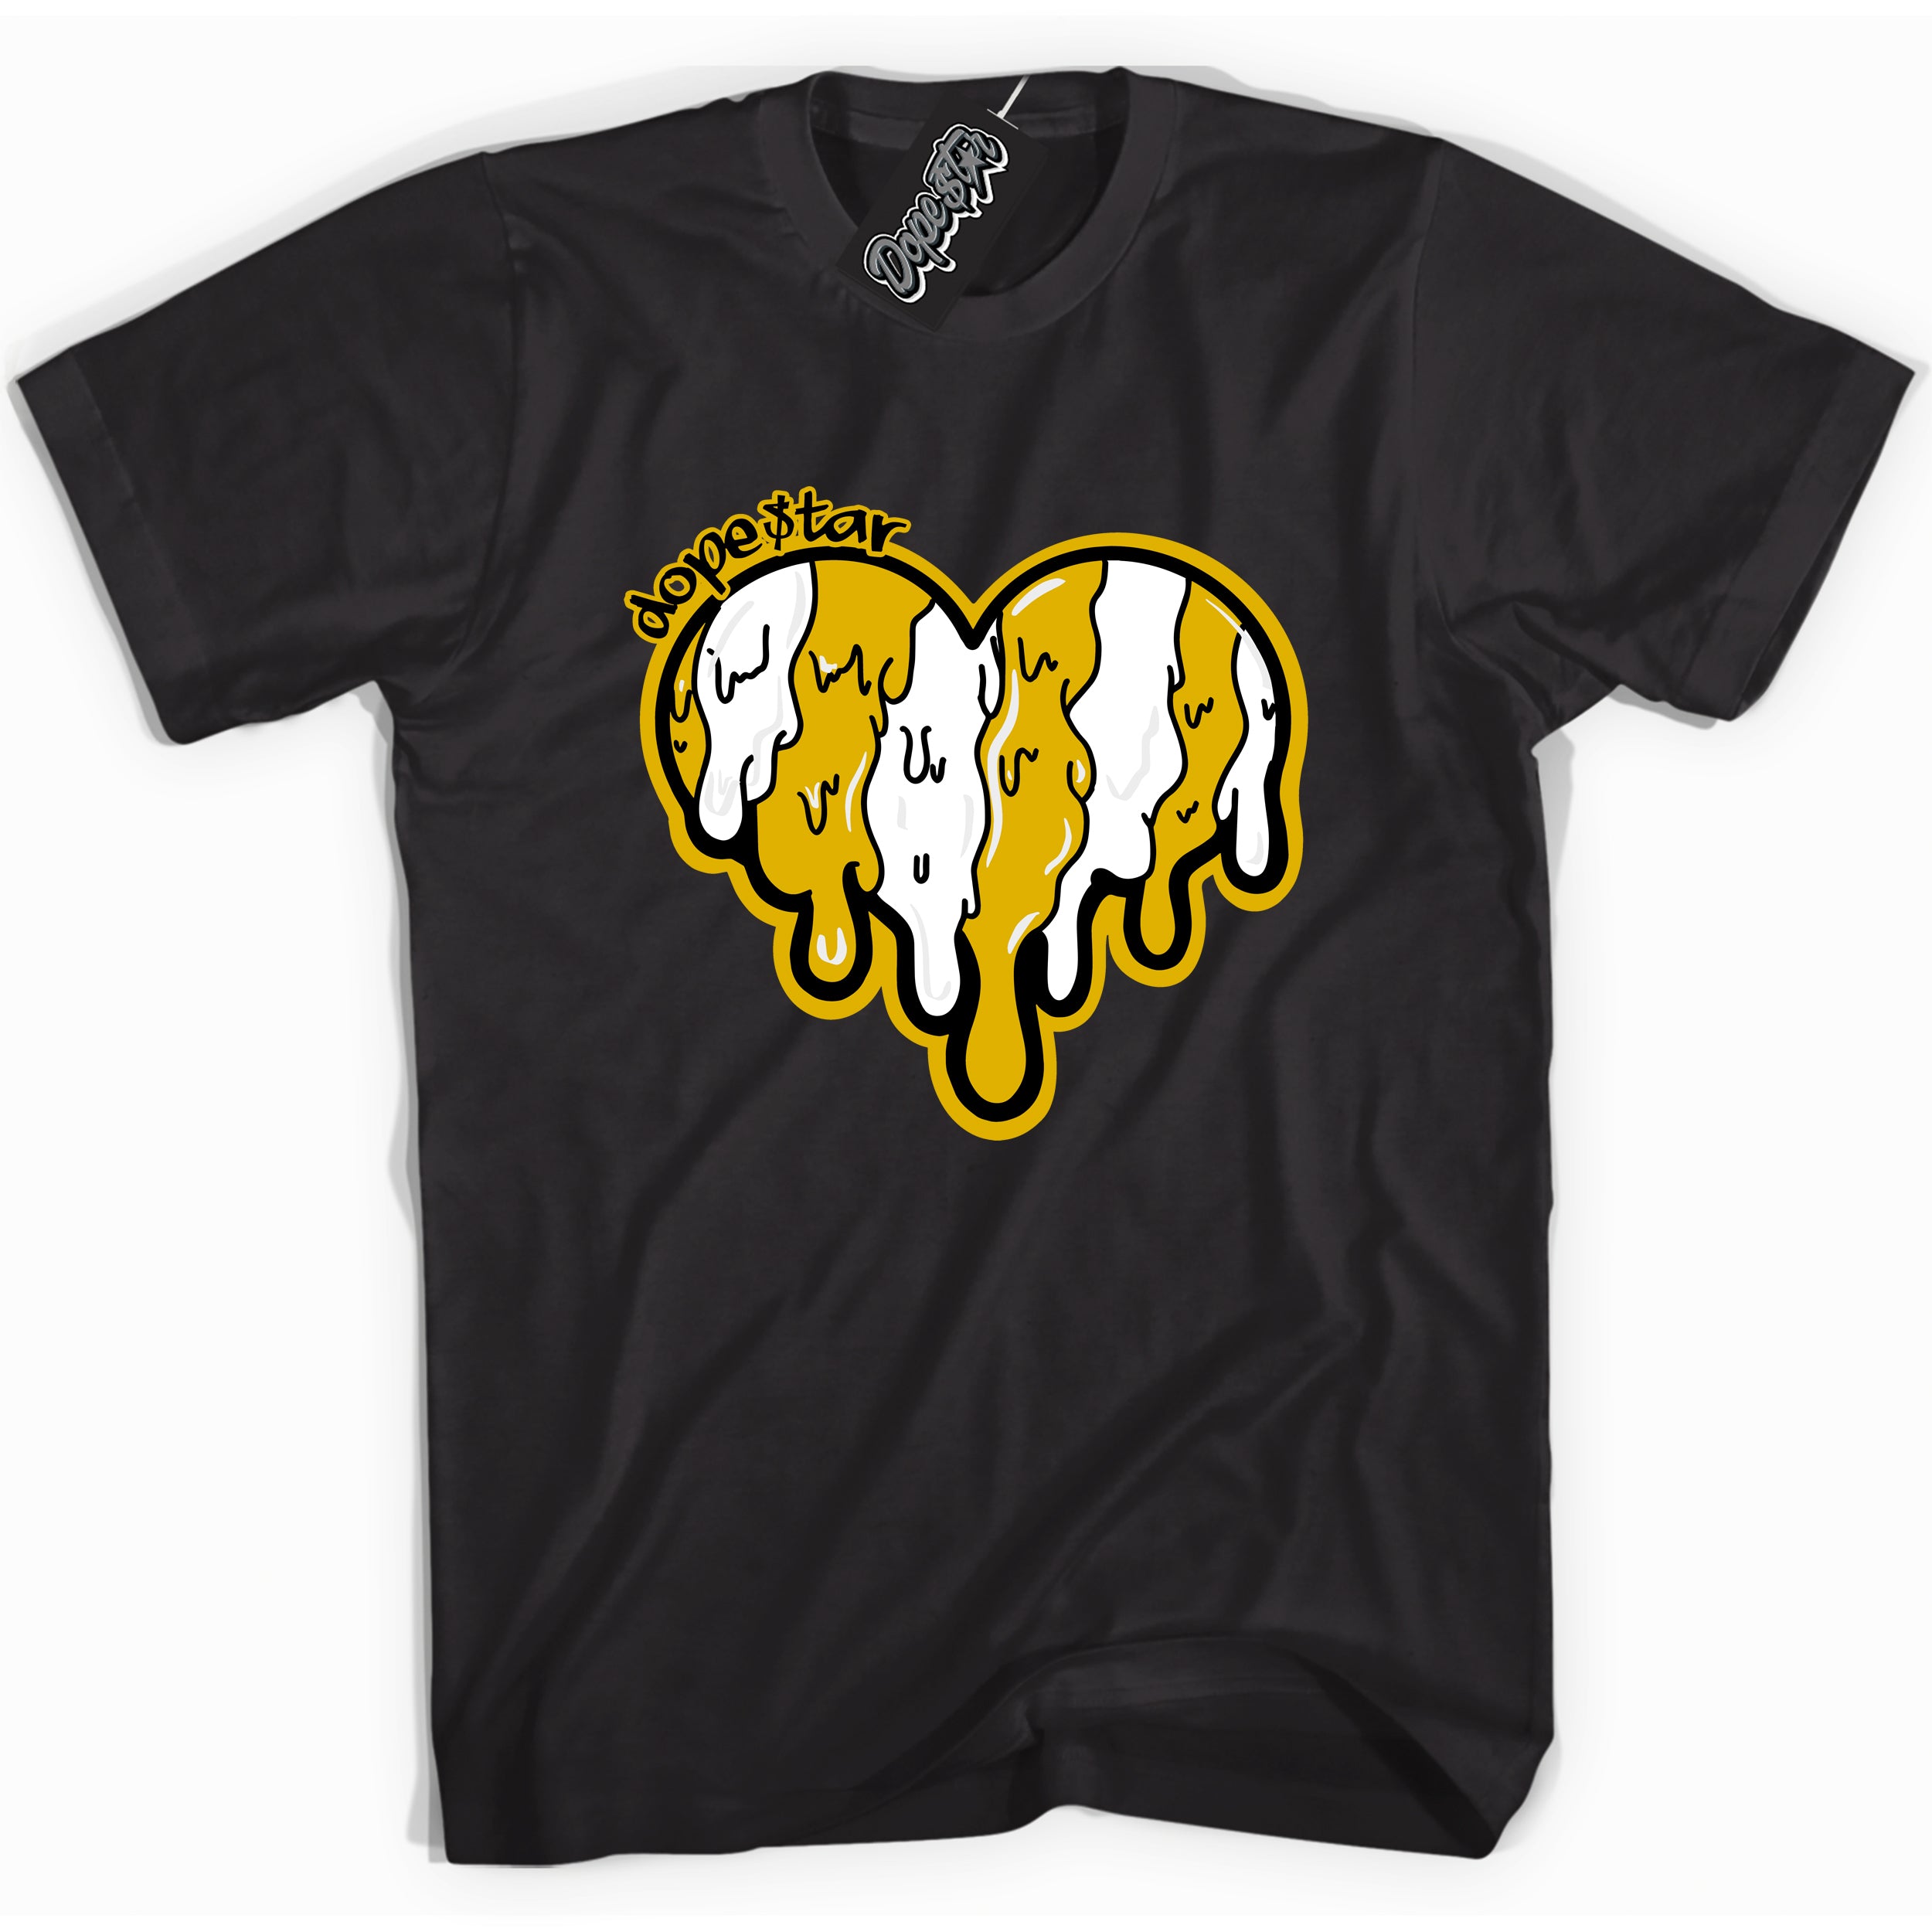 Cool Black Shirt with “ Melting Heart ” design that perfectly matches Yellow Ochre 6s Sneakers.